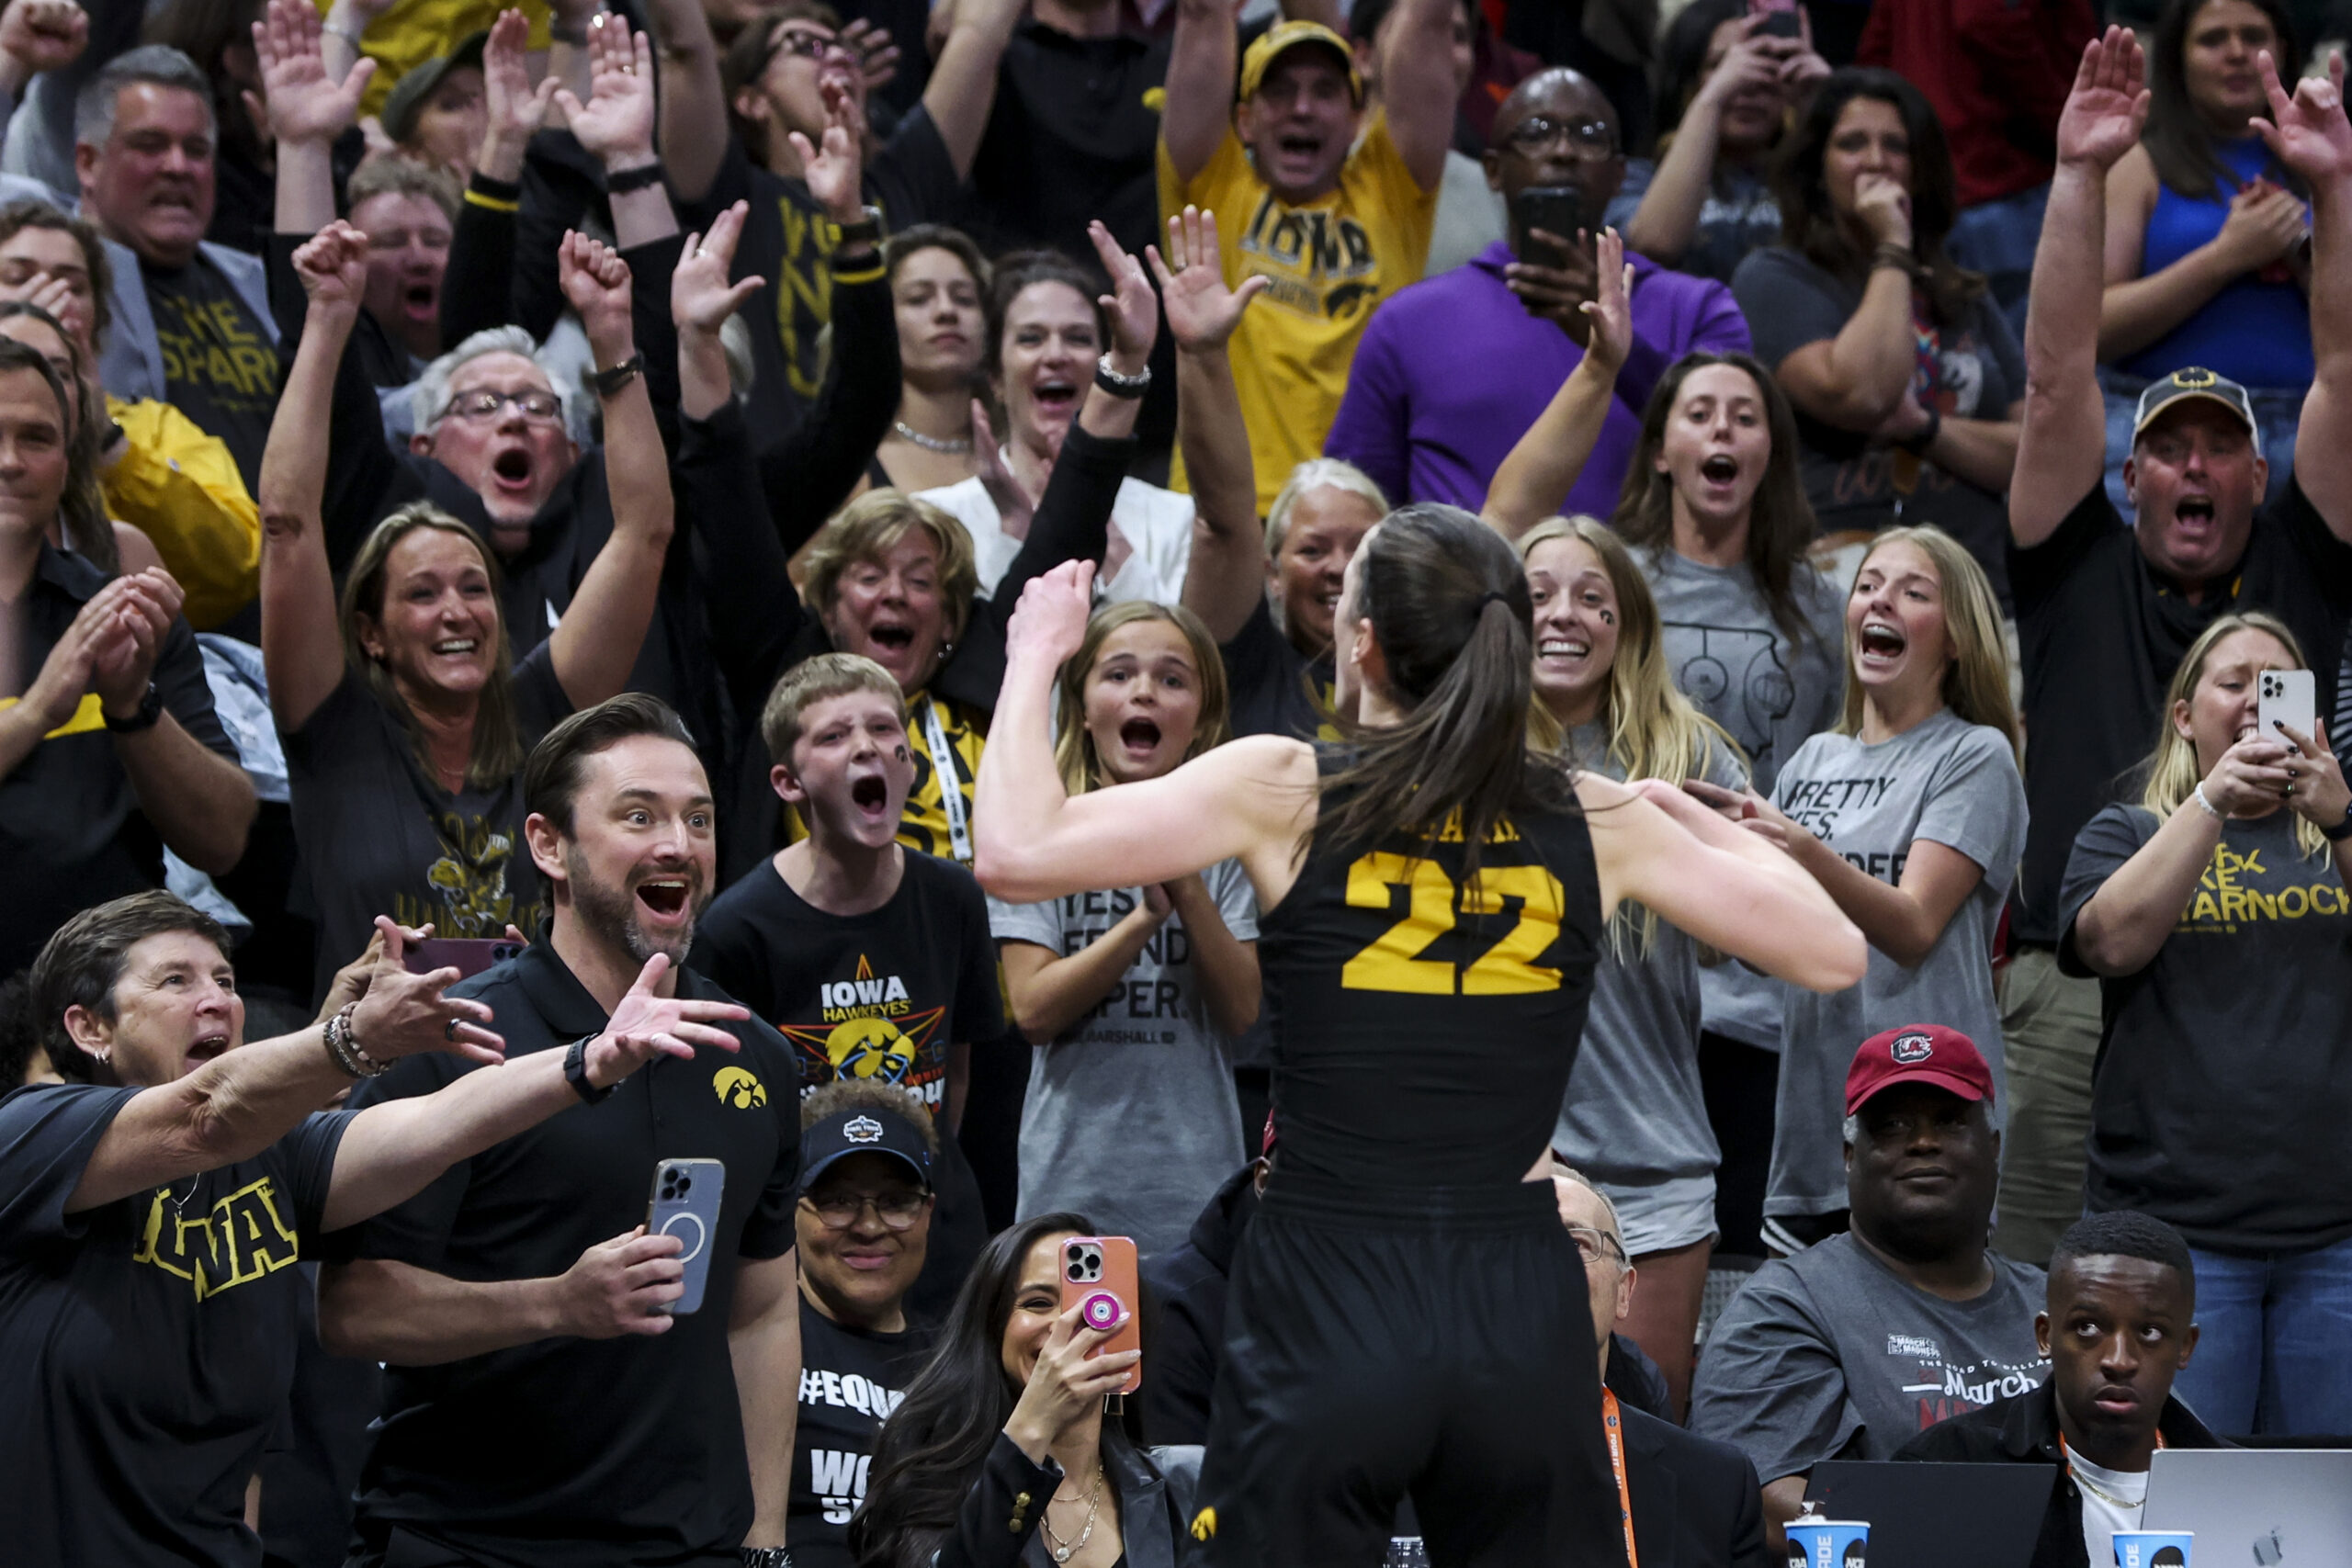 The show goes on! Takeaways from Hawkeyes’ historic Final Four win to advance to title game